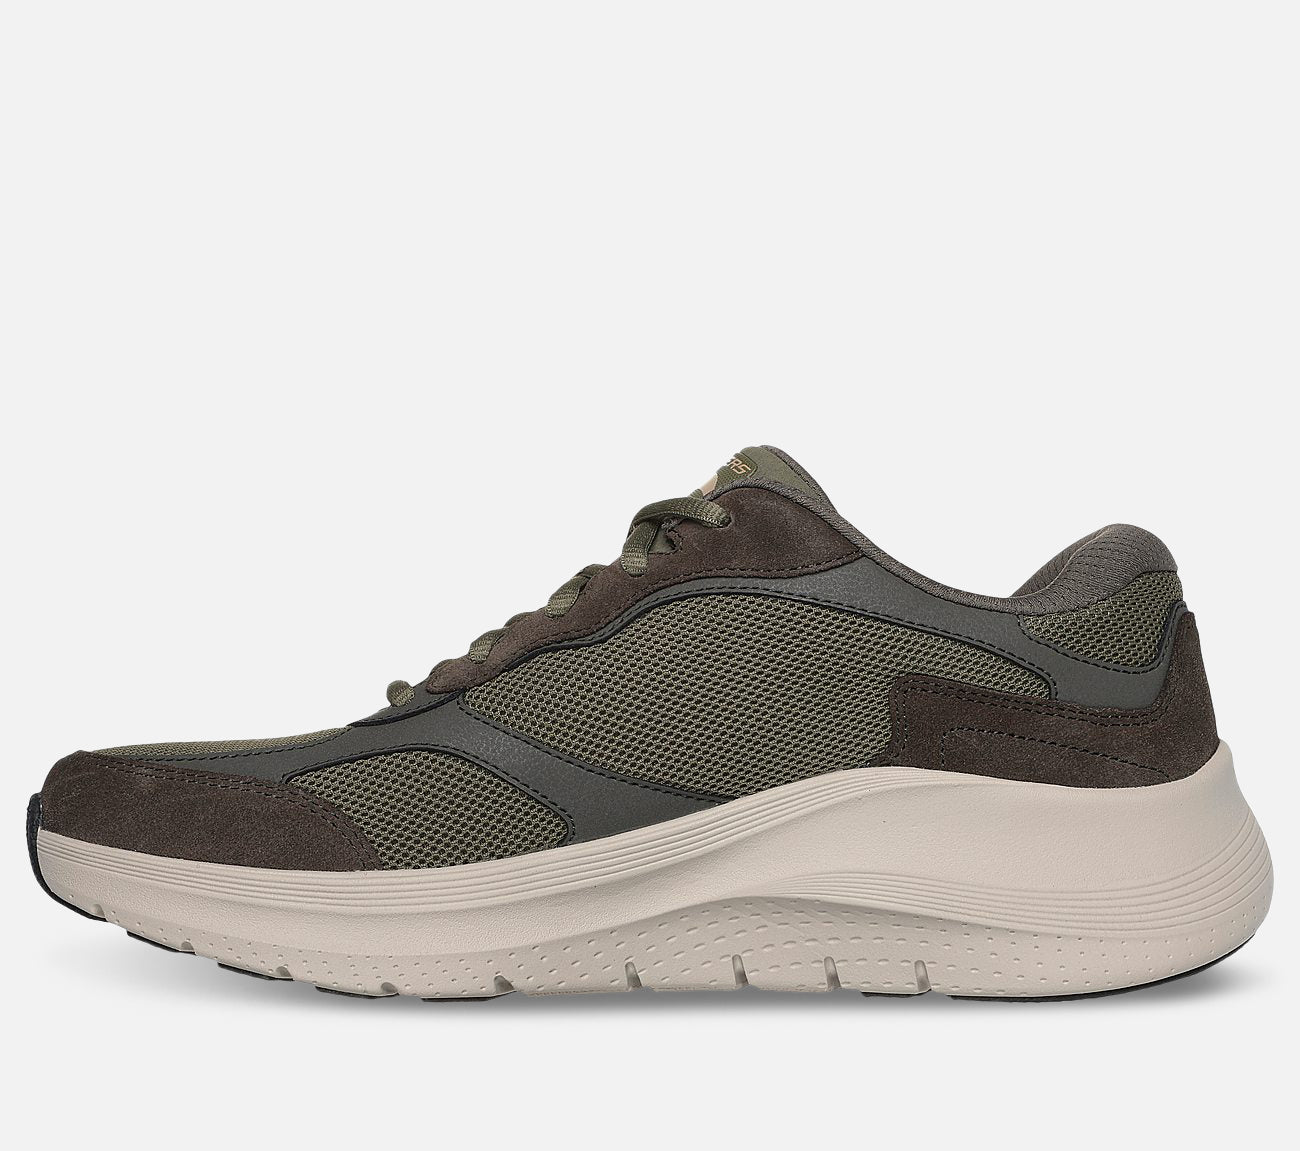 Arch Fit 2.0 - The Keep Shoe Skechers